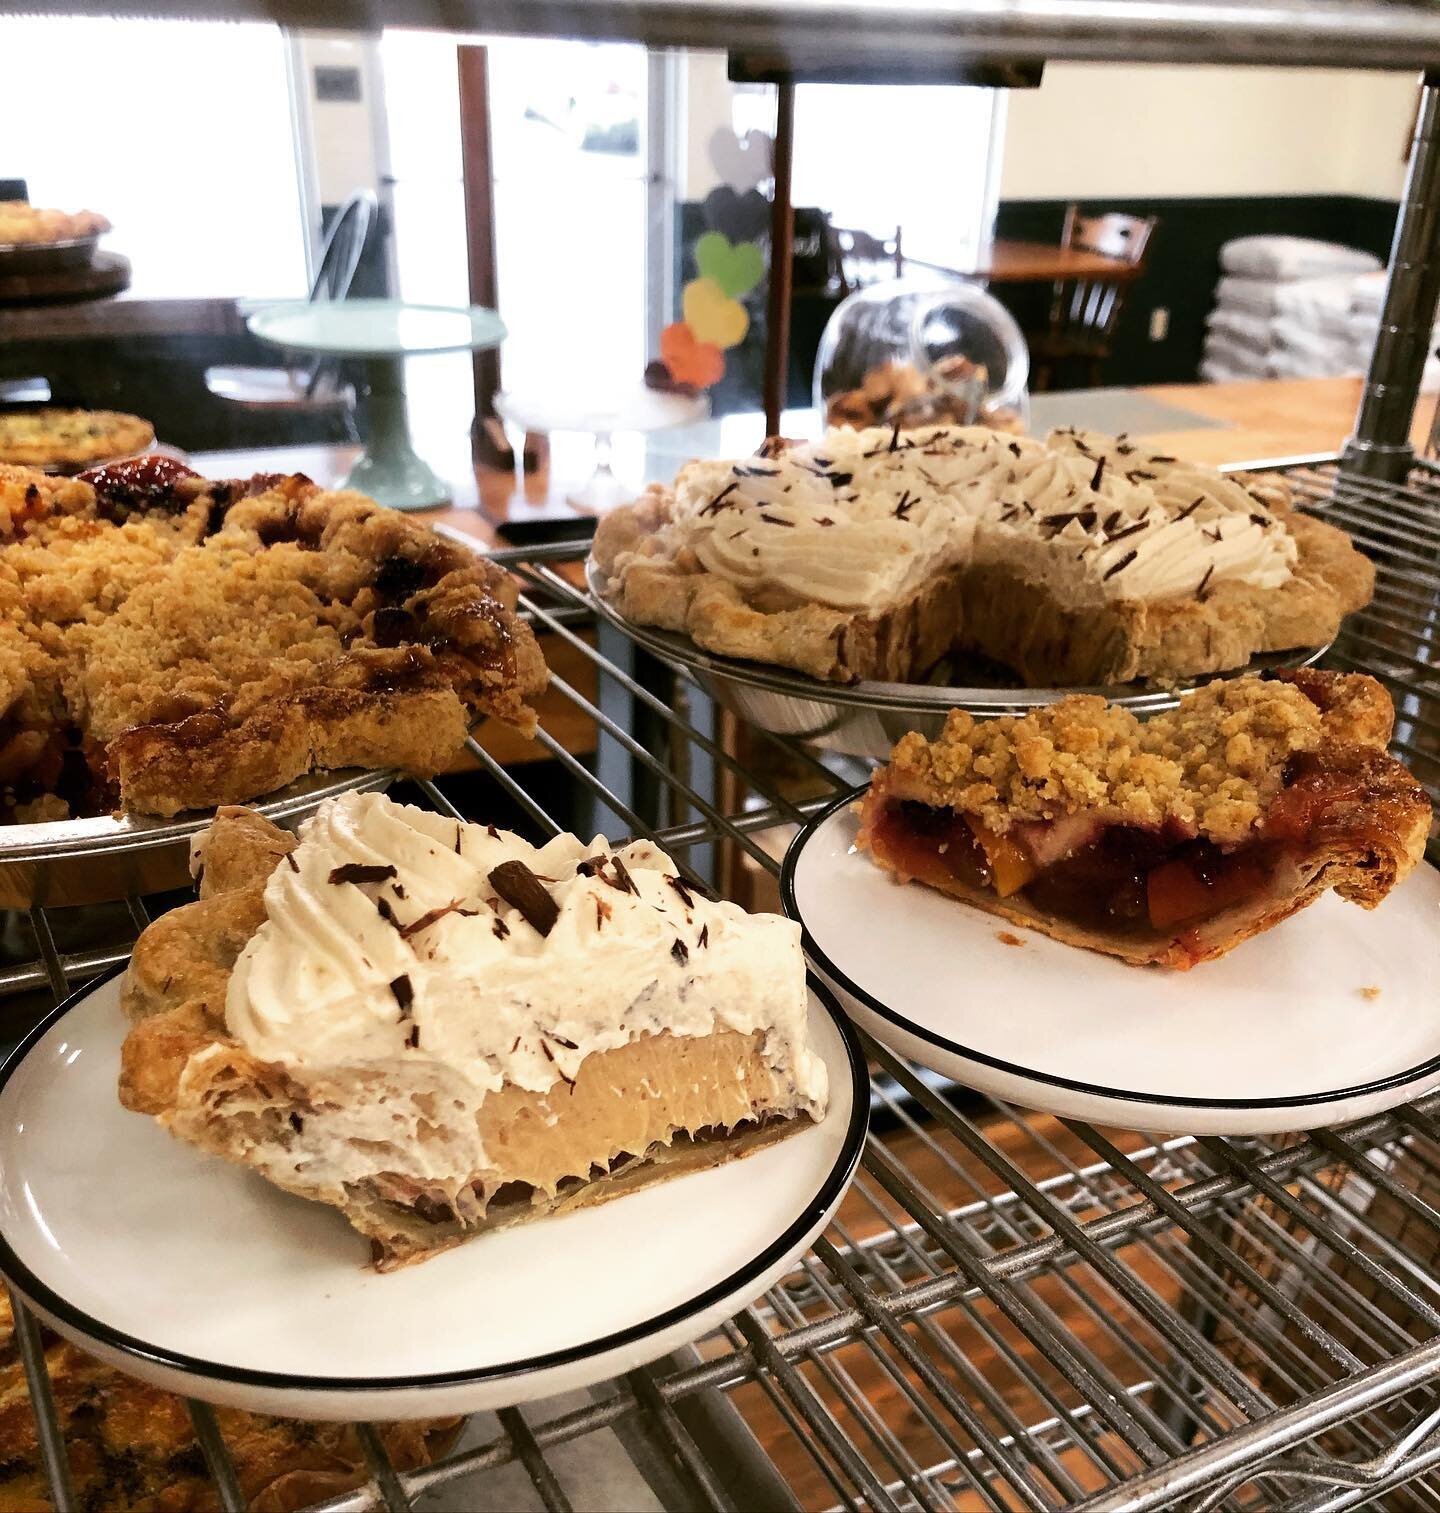 Good morning! Todays pie-by-the-slice : peanut butter or blackberry peach 🍑 

Sourdough specials: kamut, kalamata olive, Rugbr&oslash;d
Daily rye: seeded rye 

For lunch: quiche, quinoa salad, veggie sandwiches with sunflower seed pesto, fresh mozza